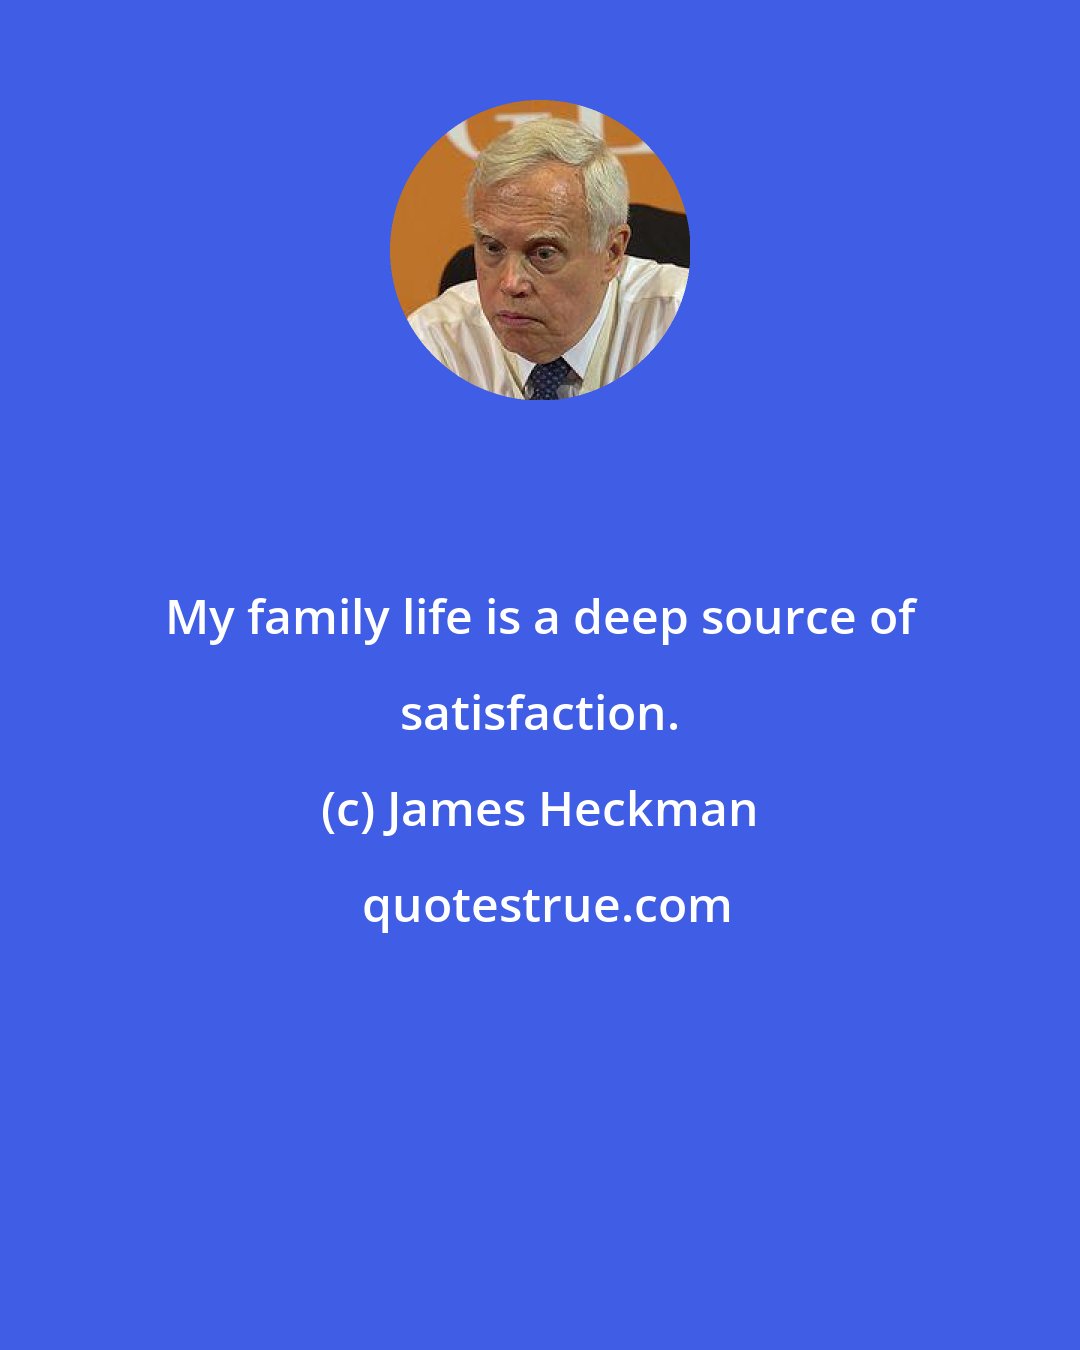 James Heckman: My family life is a deep source of satisfaction.